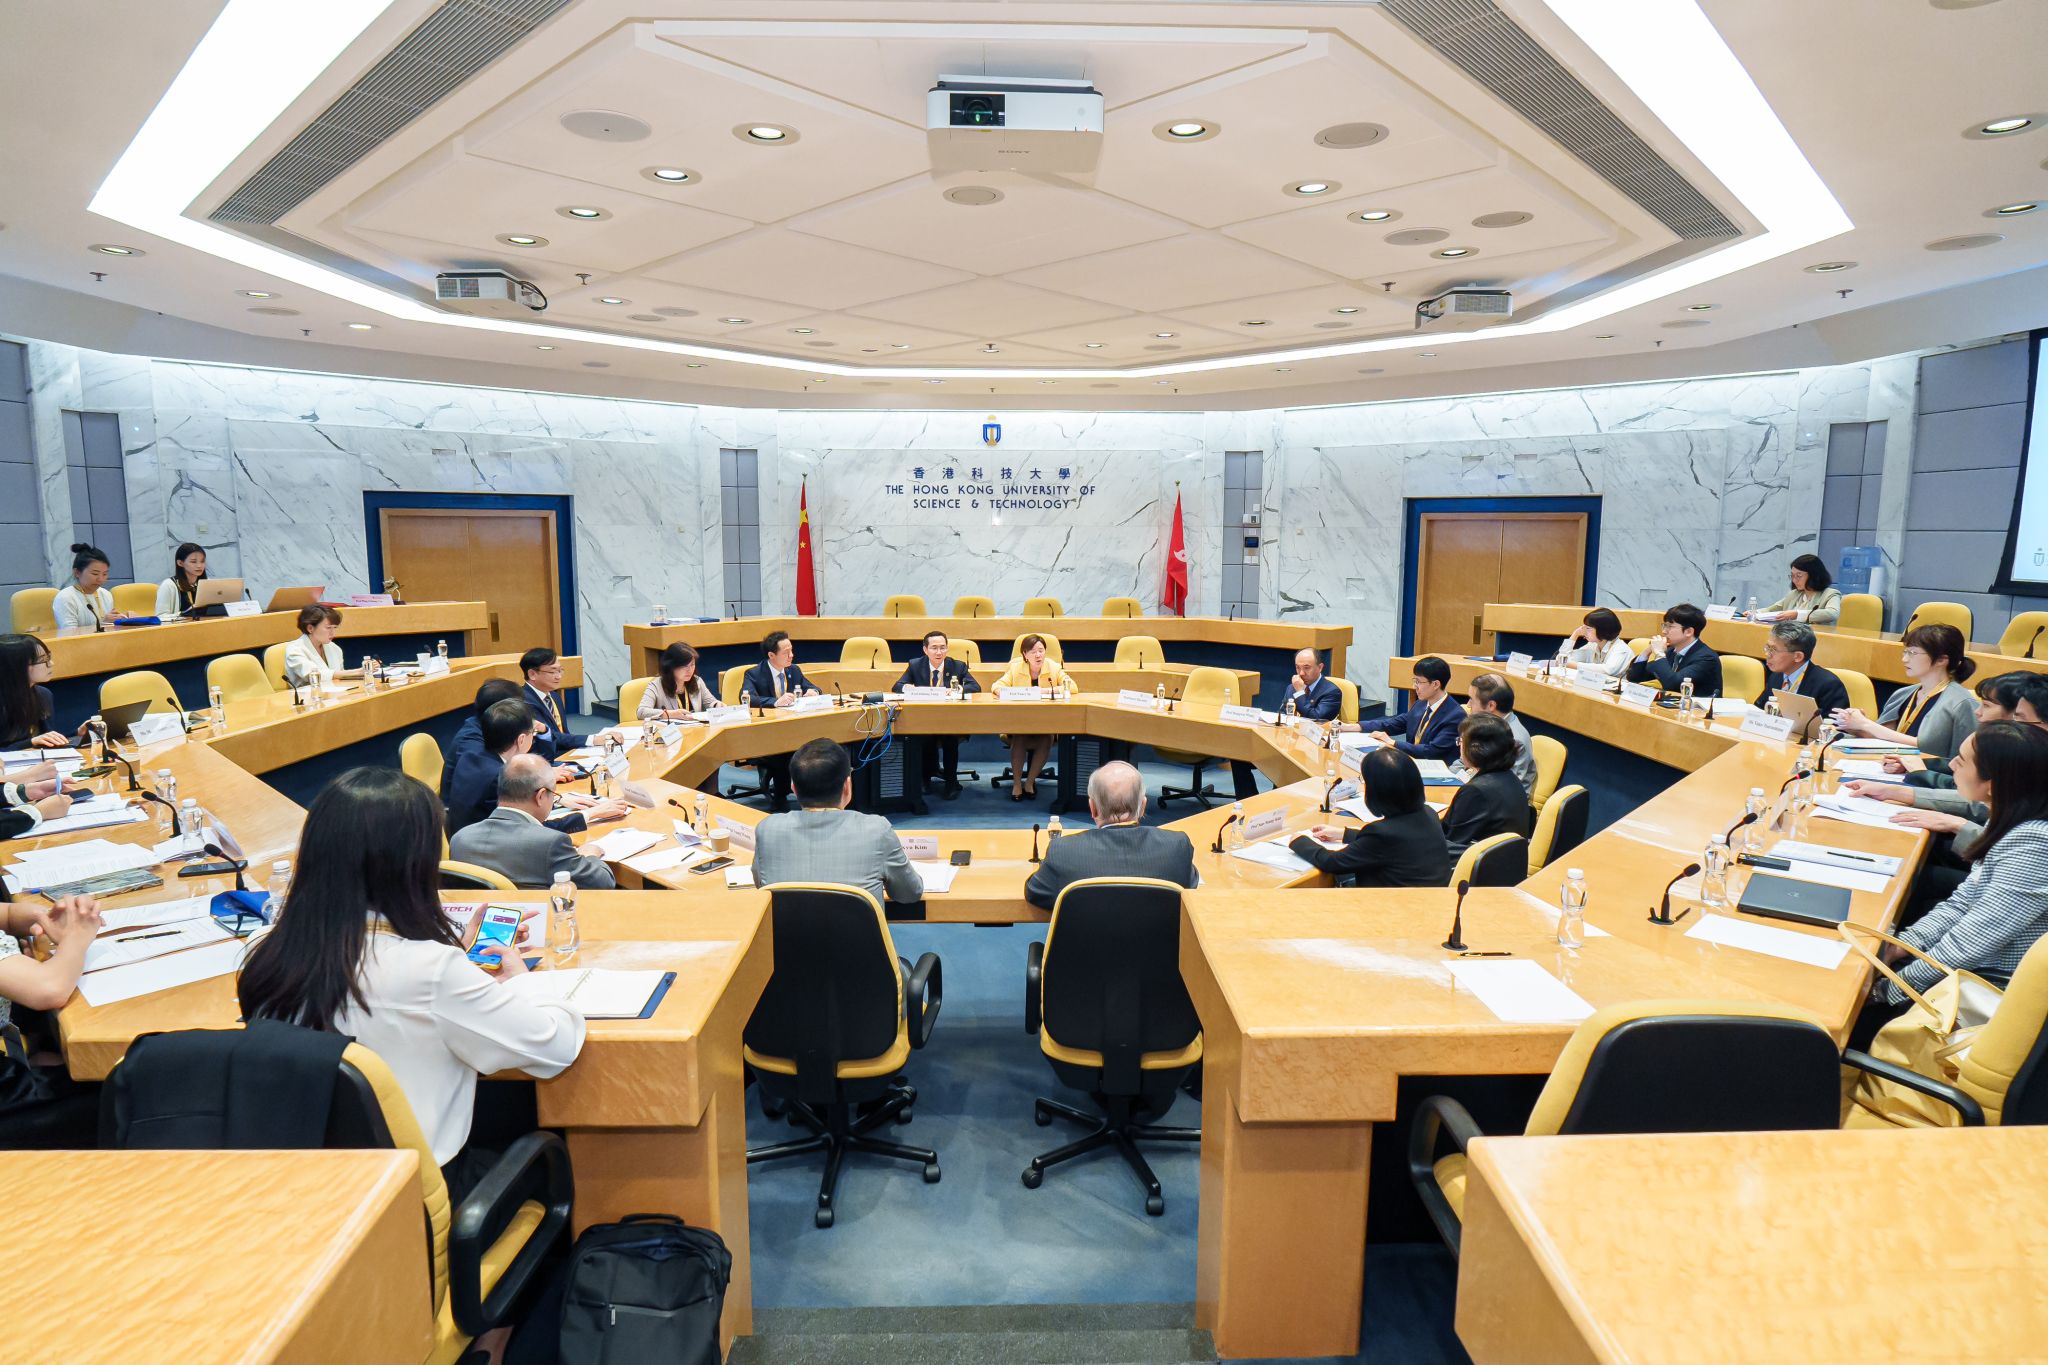 HKUST hosted the 29th Annual General Meeting (AGM) and the 53rd Board of Directors meeting of The Association of East Asian Research Universities (AEARU) from November 6-8, 2023. 